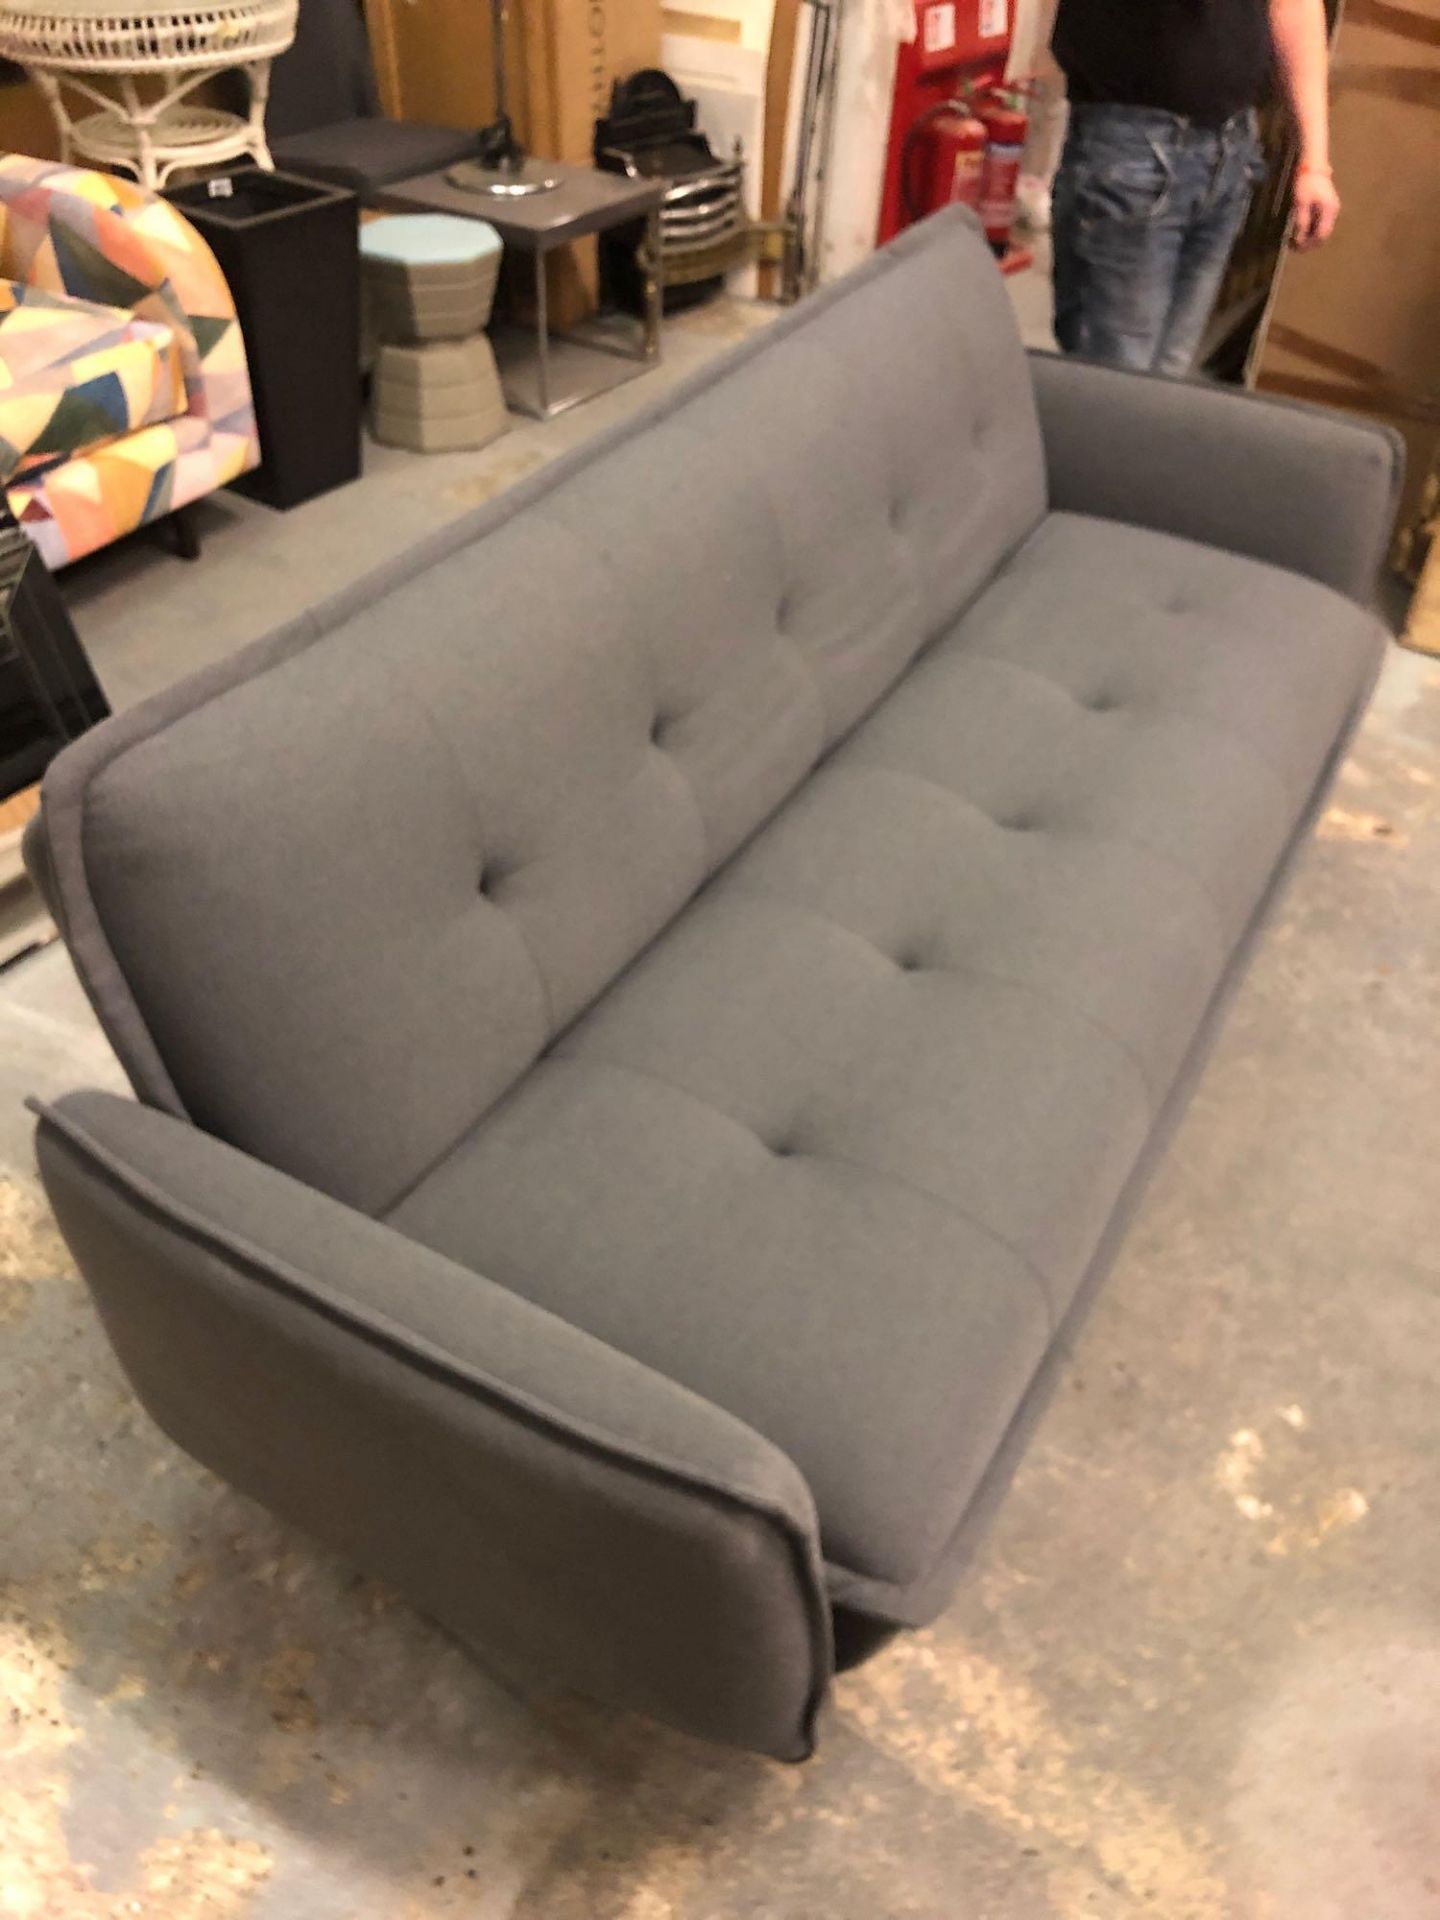 Mora Sofabed Slate W2110 x D860 x H840mm - Image 3 of 3